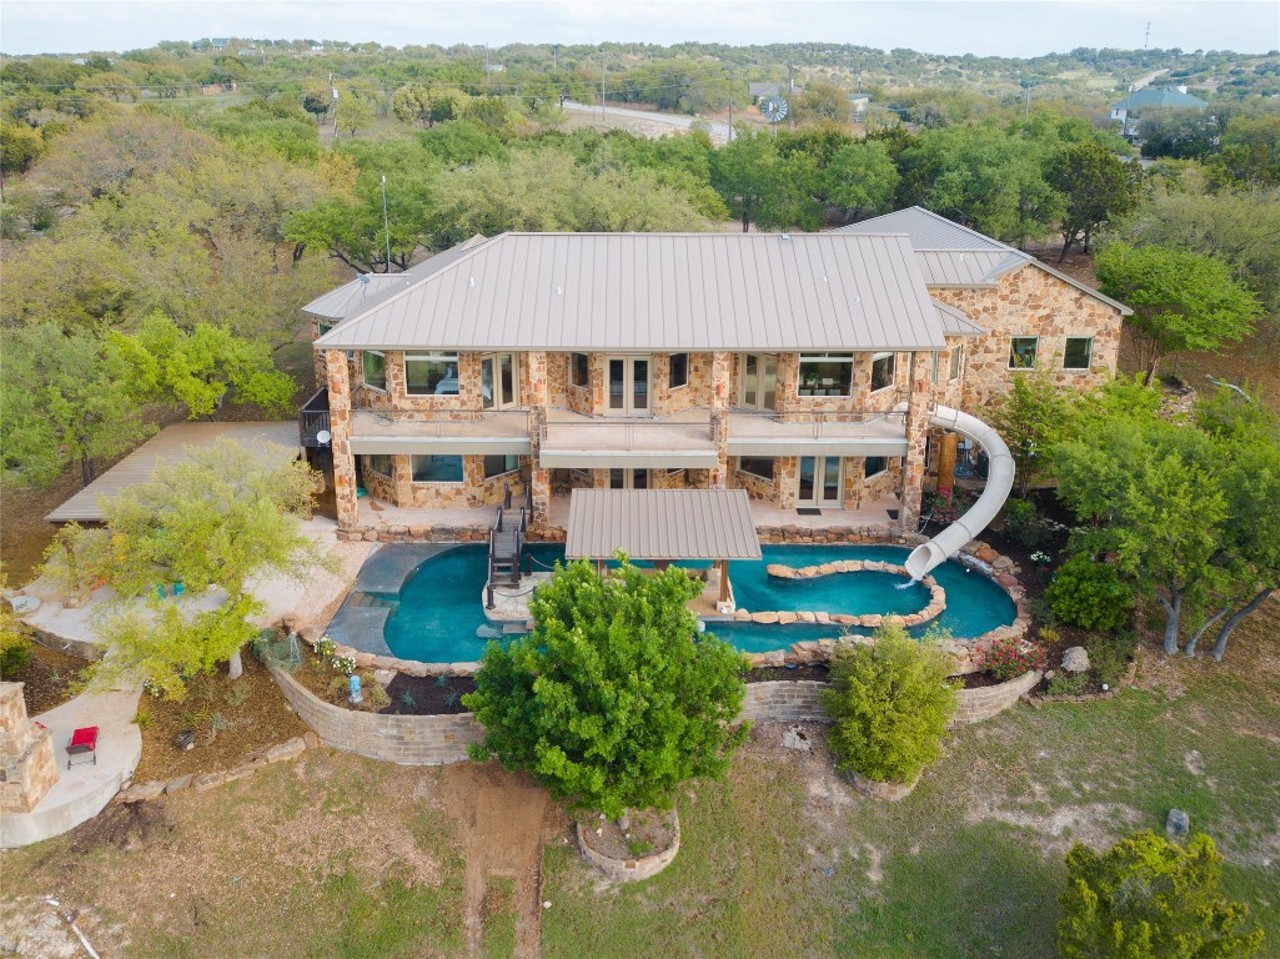 This Texas Hill Country mansion comes with a backyard lazy river and pool slide on its upper balcony